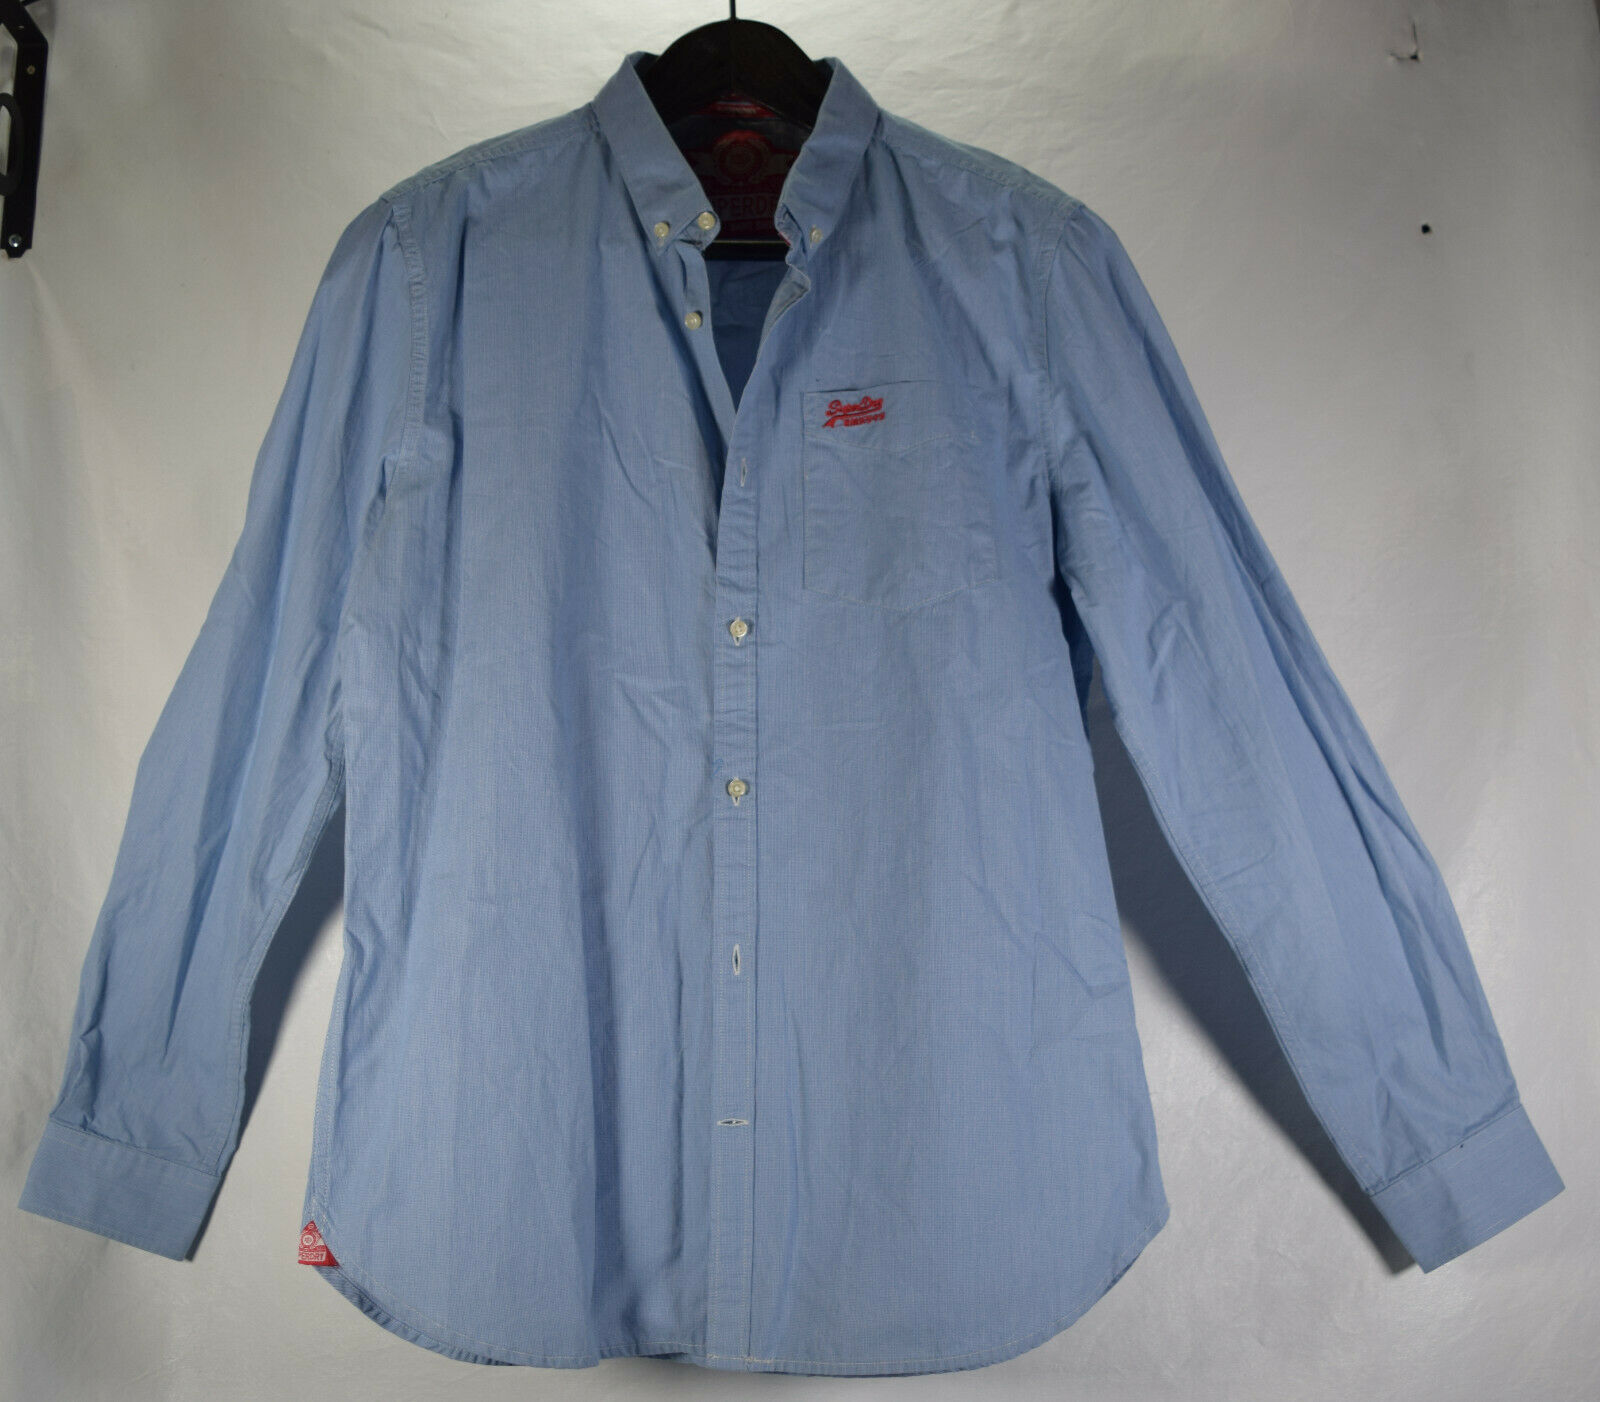 Primary image for Superdry London Button Down Blue LS Shirt 2XL New